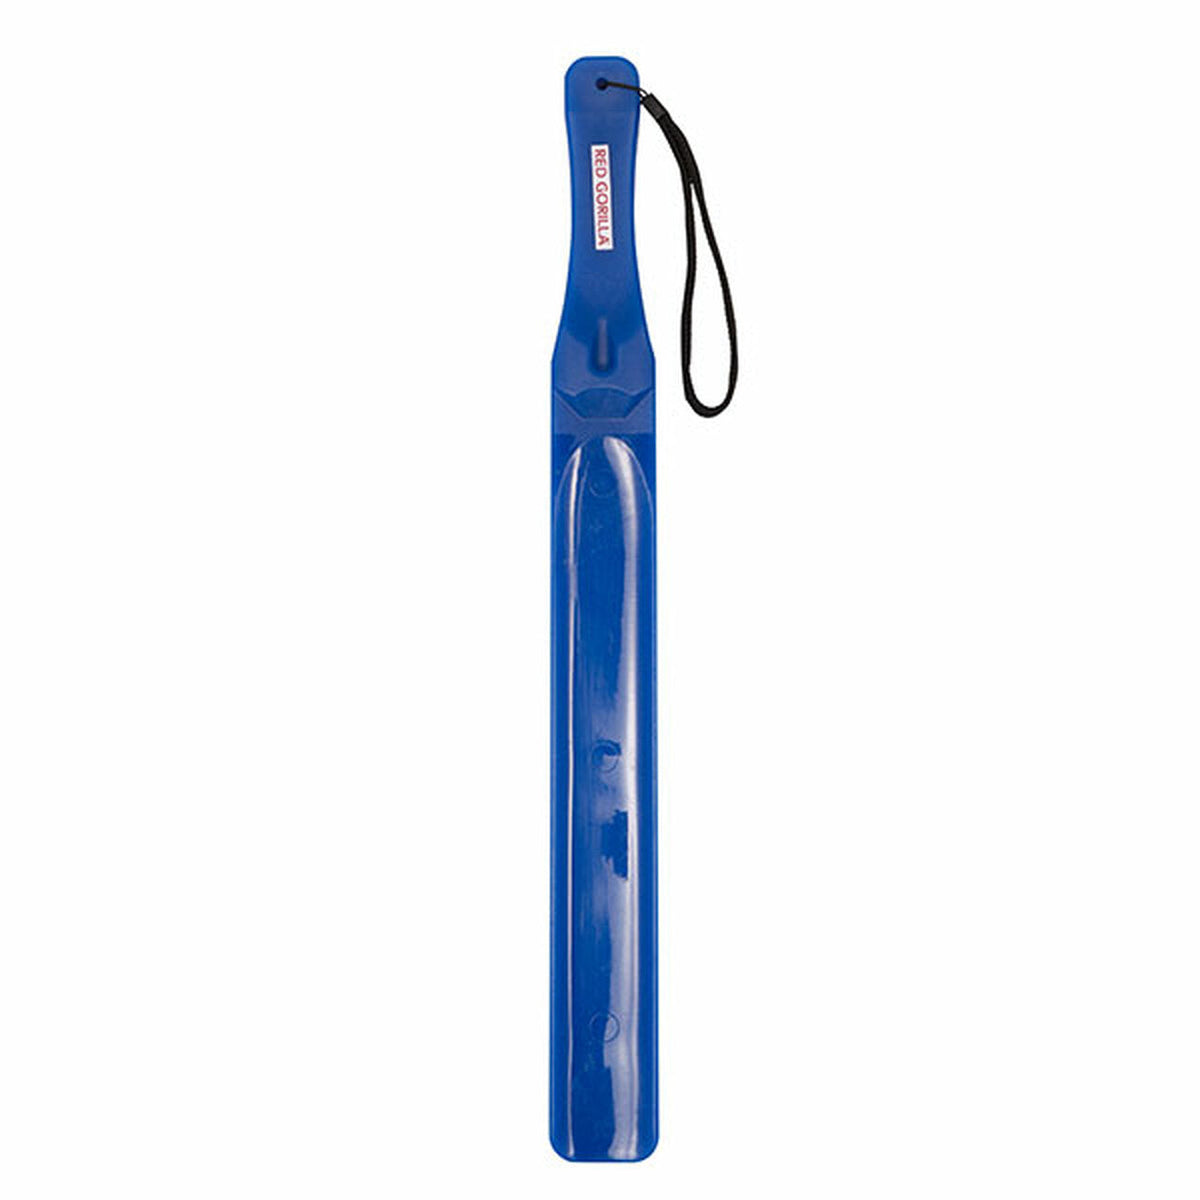 Navy plastic feed stirrer, narrowed at the handle with black hand loop.